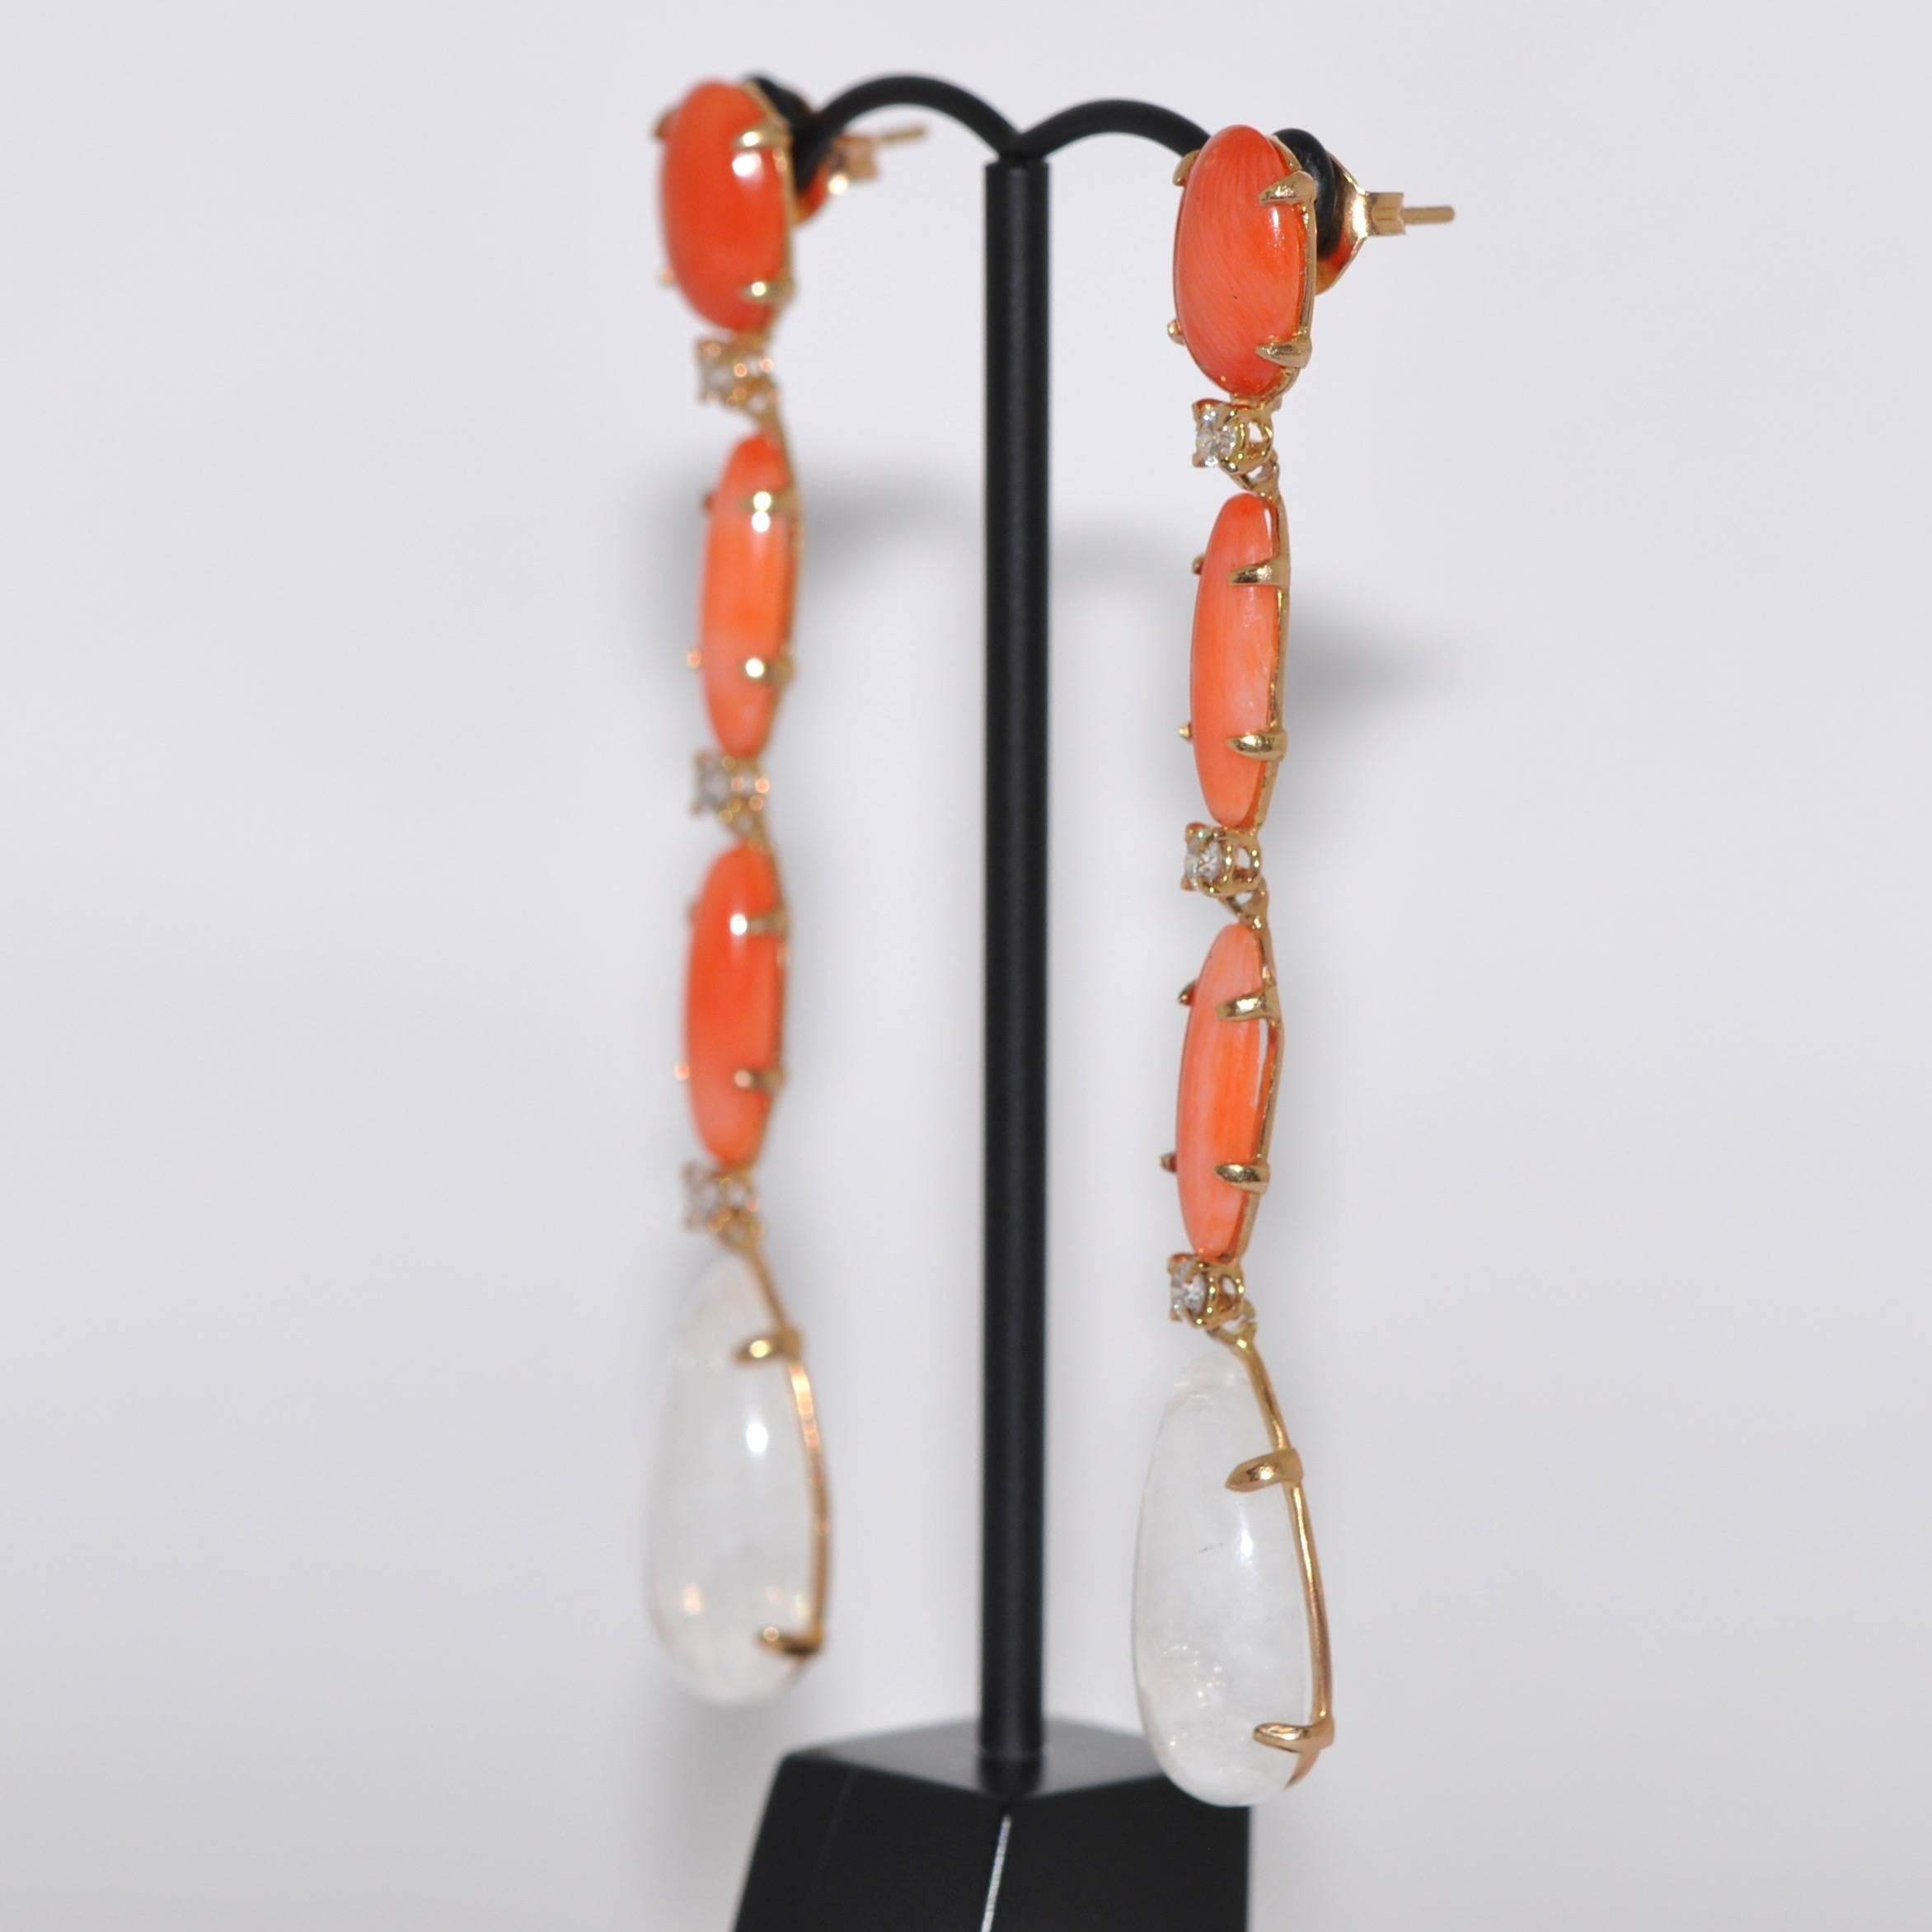 Discover this Coral, Moonstone and Diamond Yellow Gold Chandelier Earrings.
Coral
Moonstone
White Diamond
Yellow Gold 18 Carat